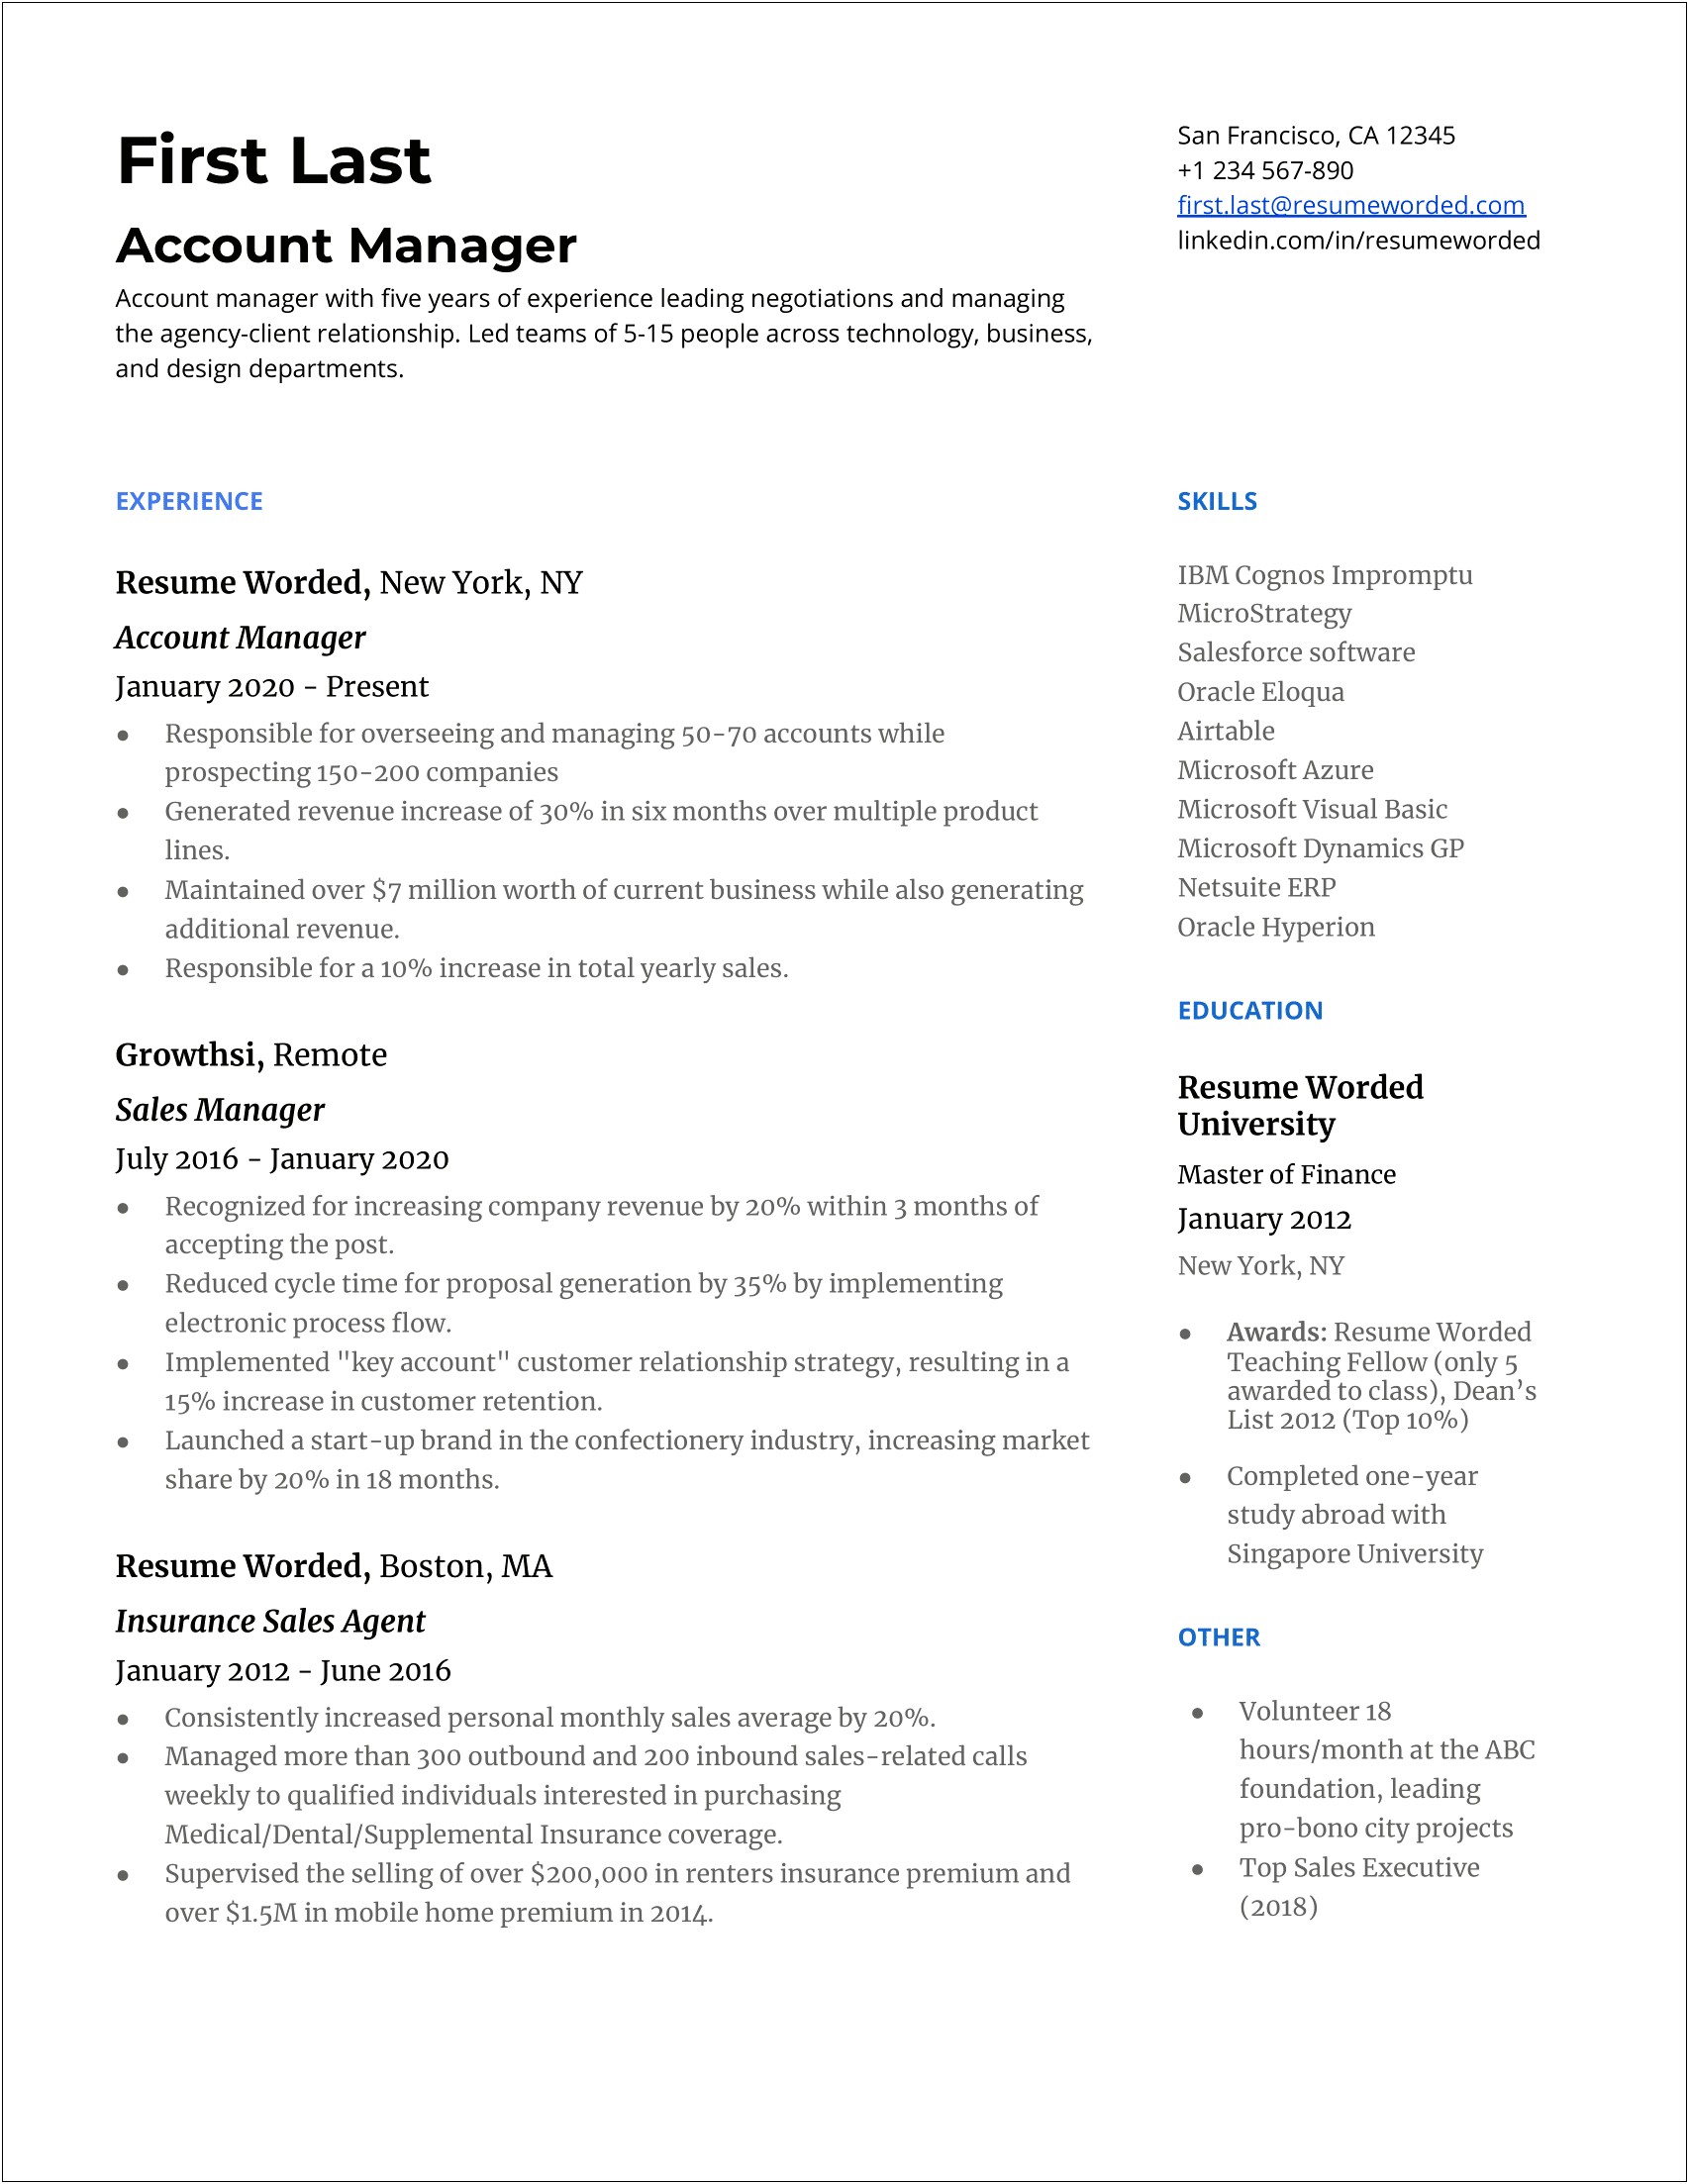 Resume Summary For Insurance Account Manager